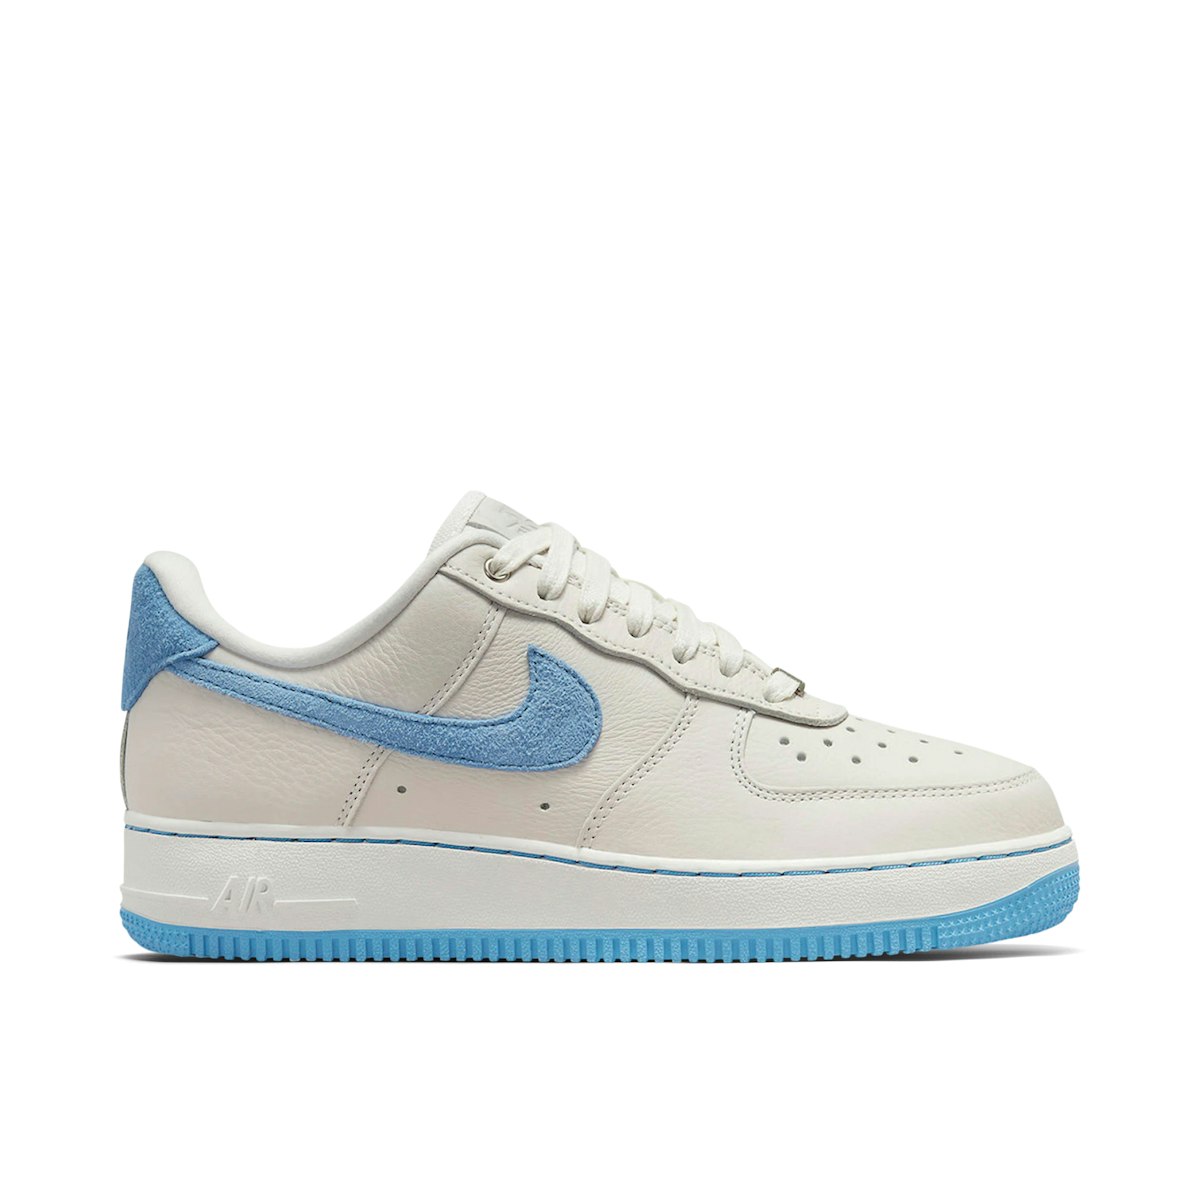 Nike Air Force 1 Low White/University Blue Release